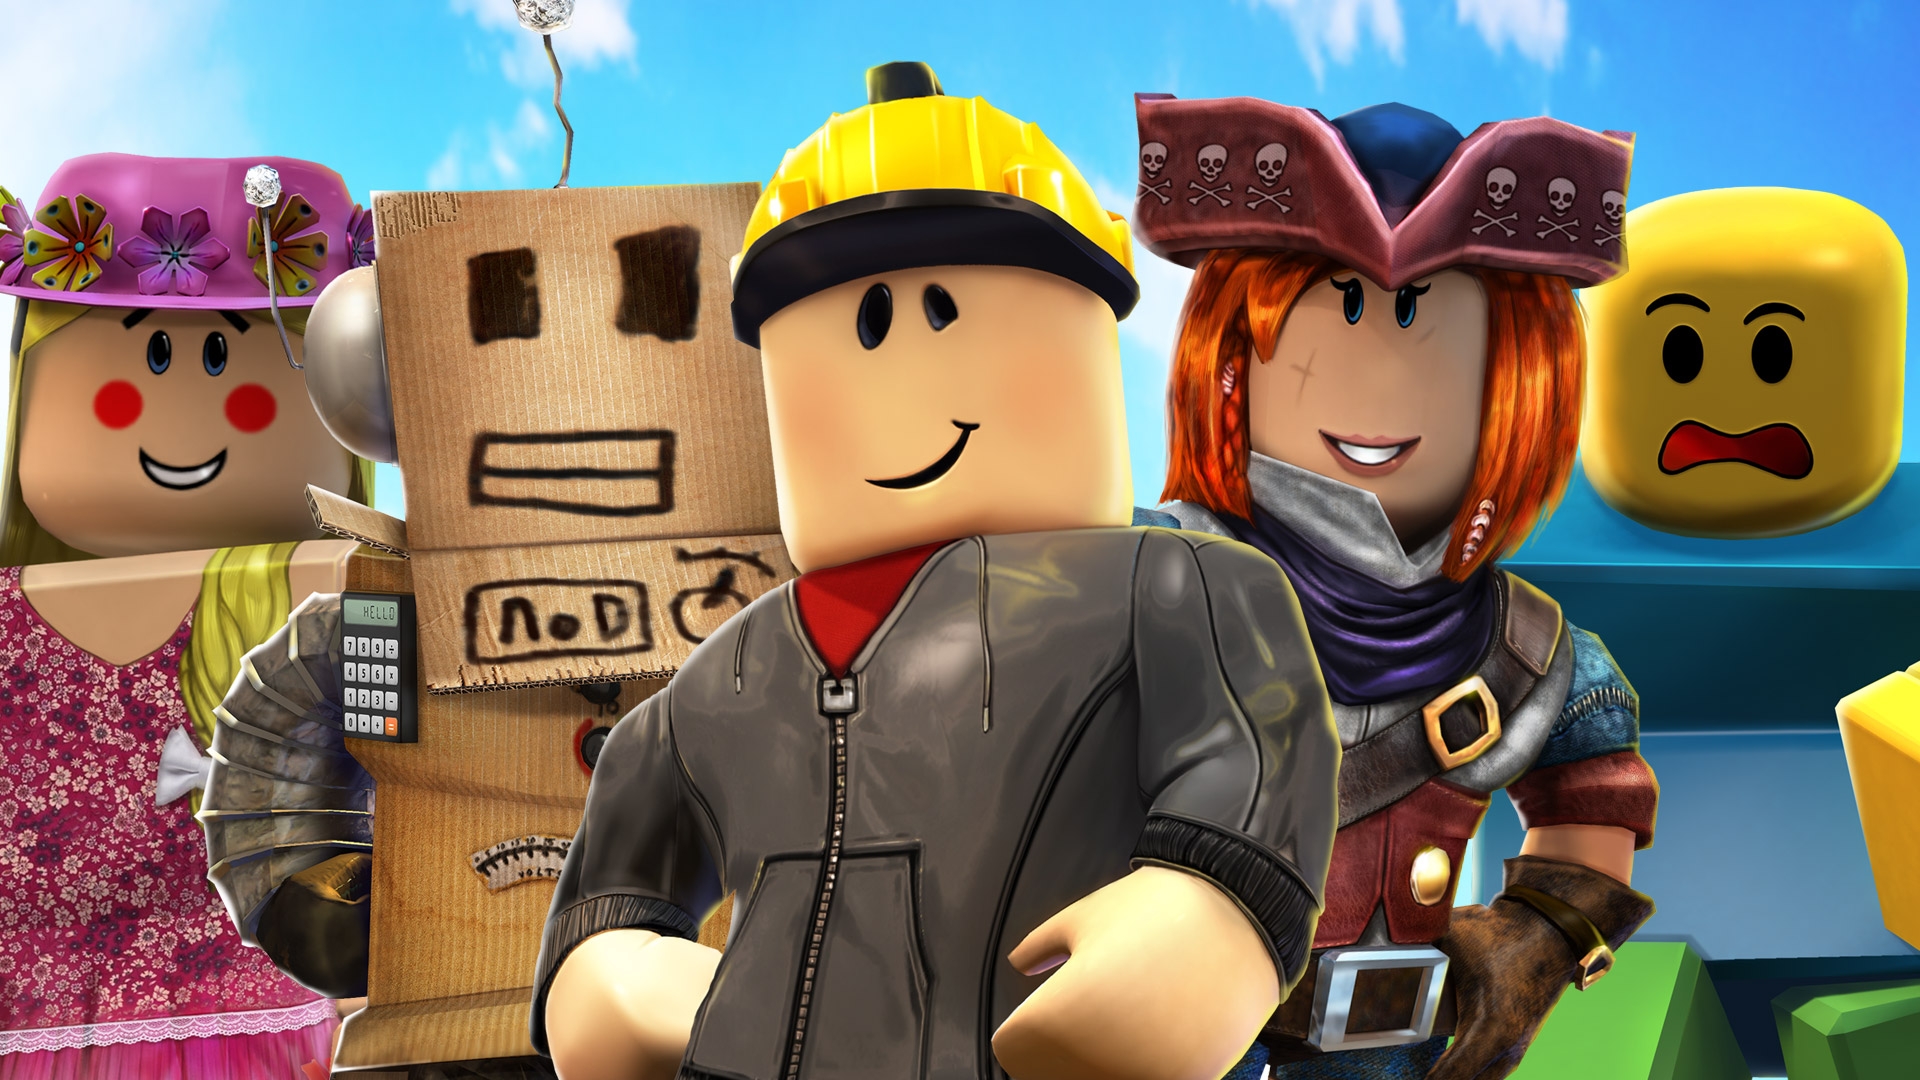 Roblox OUT TOMORROW on PS4 & PS5! #Roblox #Gaming #Gamer #PS5 #Yorrick